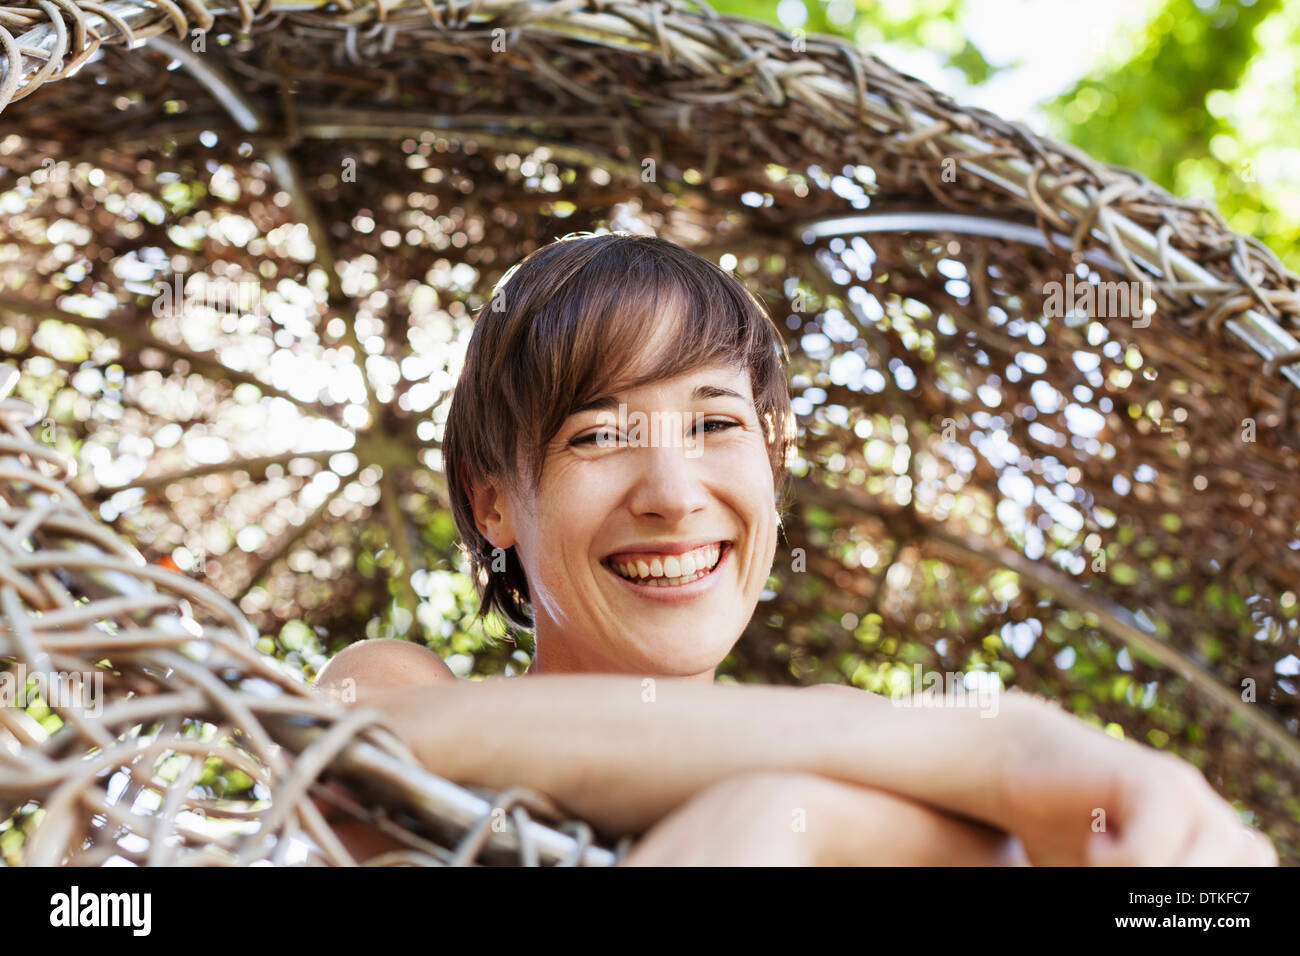 Woman laughing in tree house Stock Photo